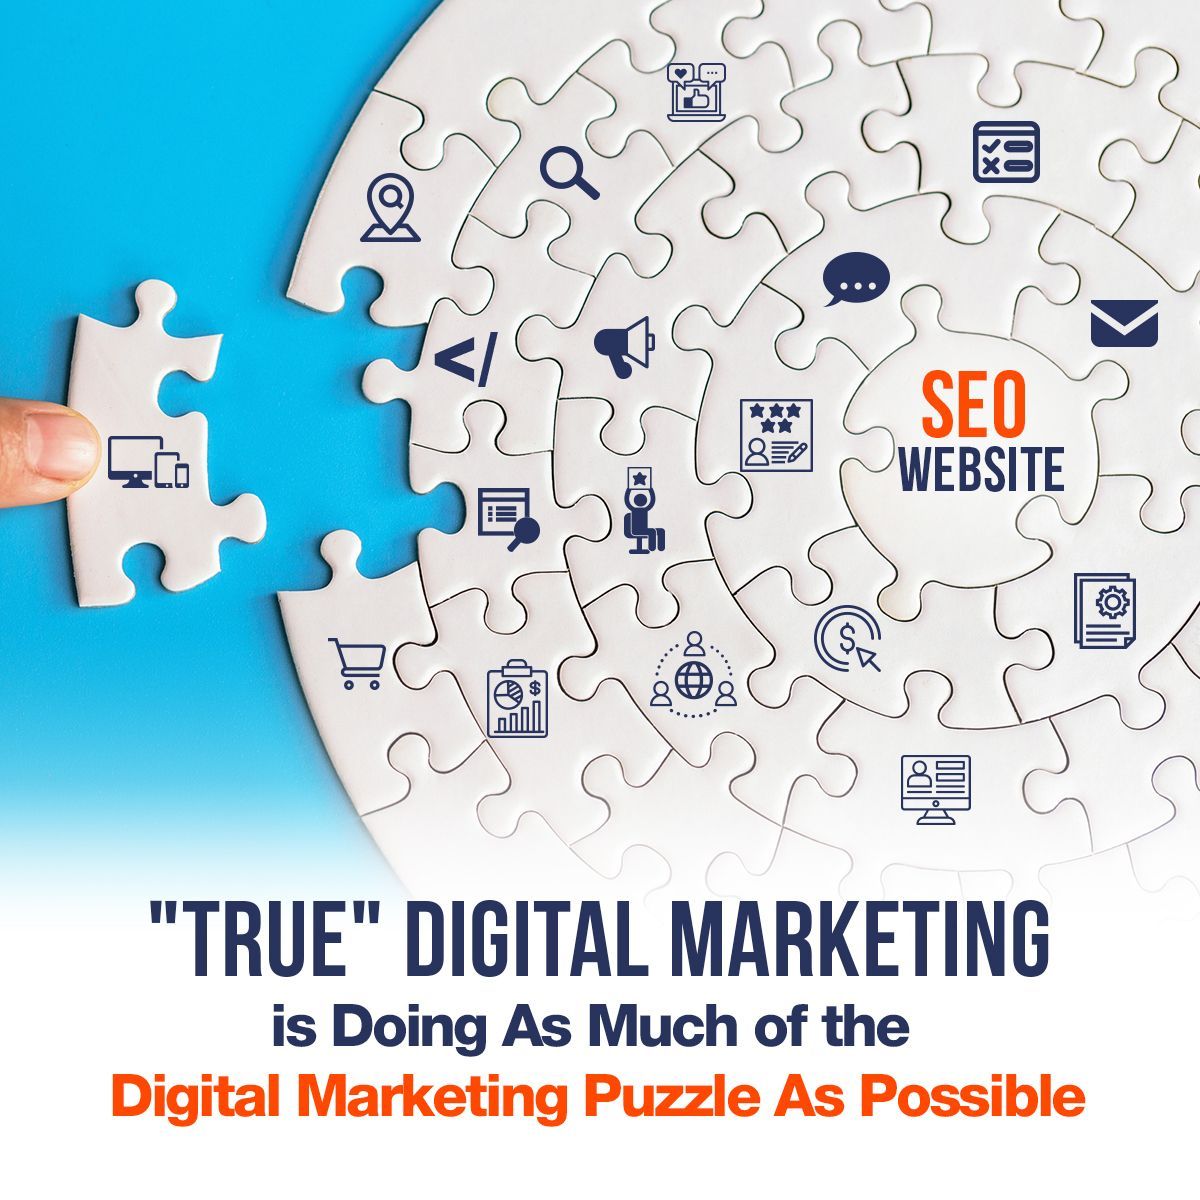 True Digital Marketing is Doing As Much of the Digital Marketing Puzzle As Possible